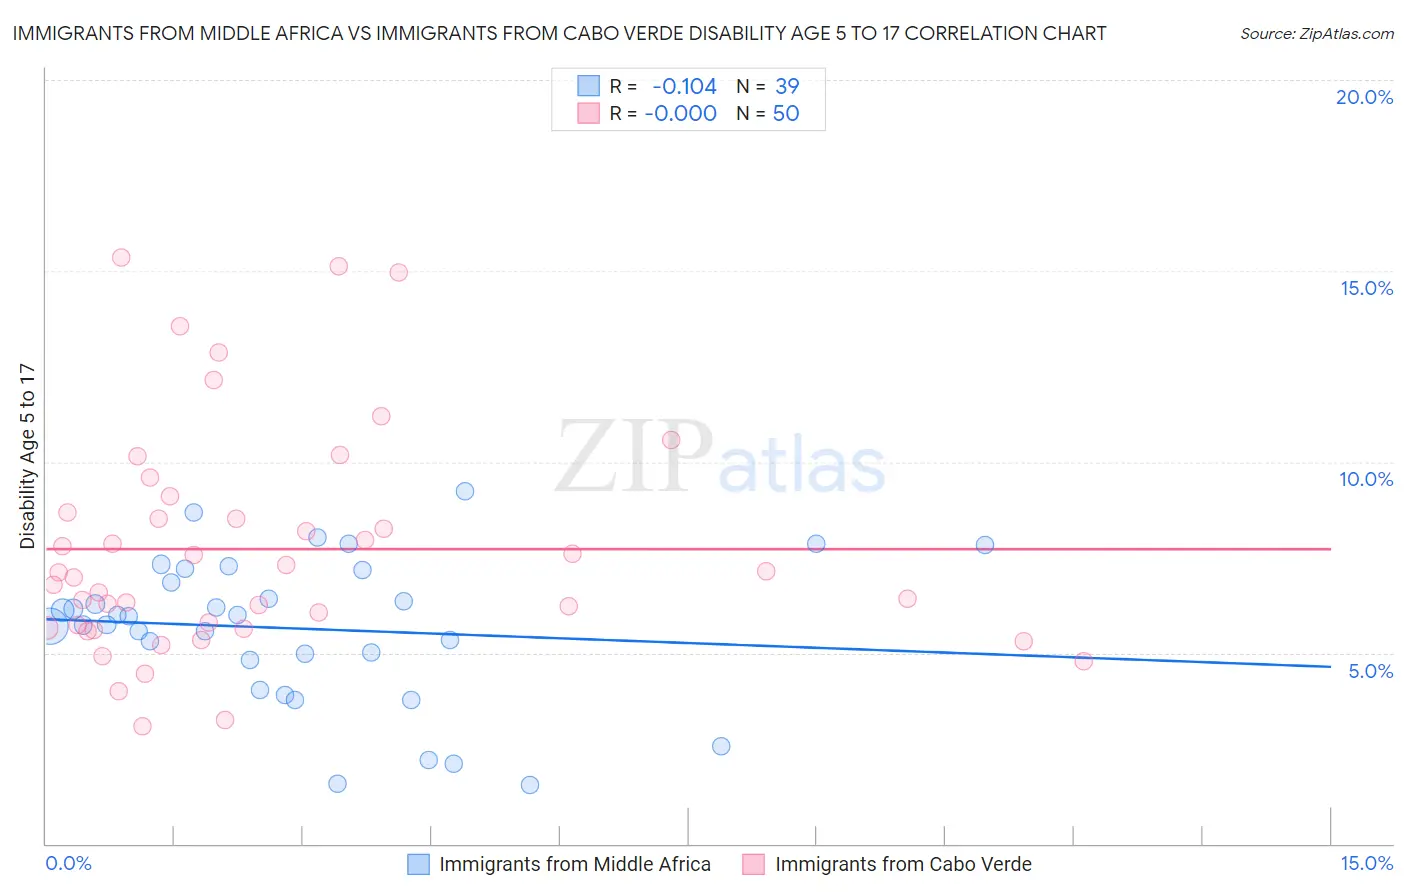 Immigrants from Middle Africa vs Immigrants from Cabo Verde Disability Age 5 to 17